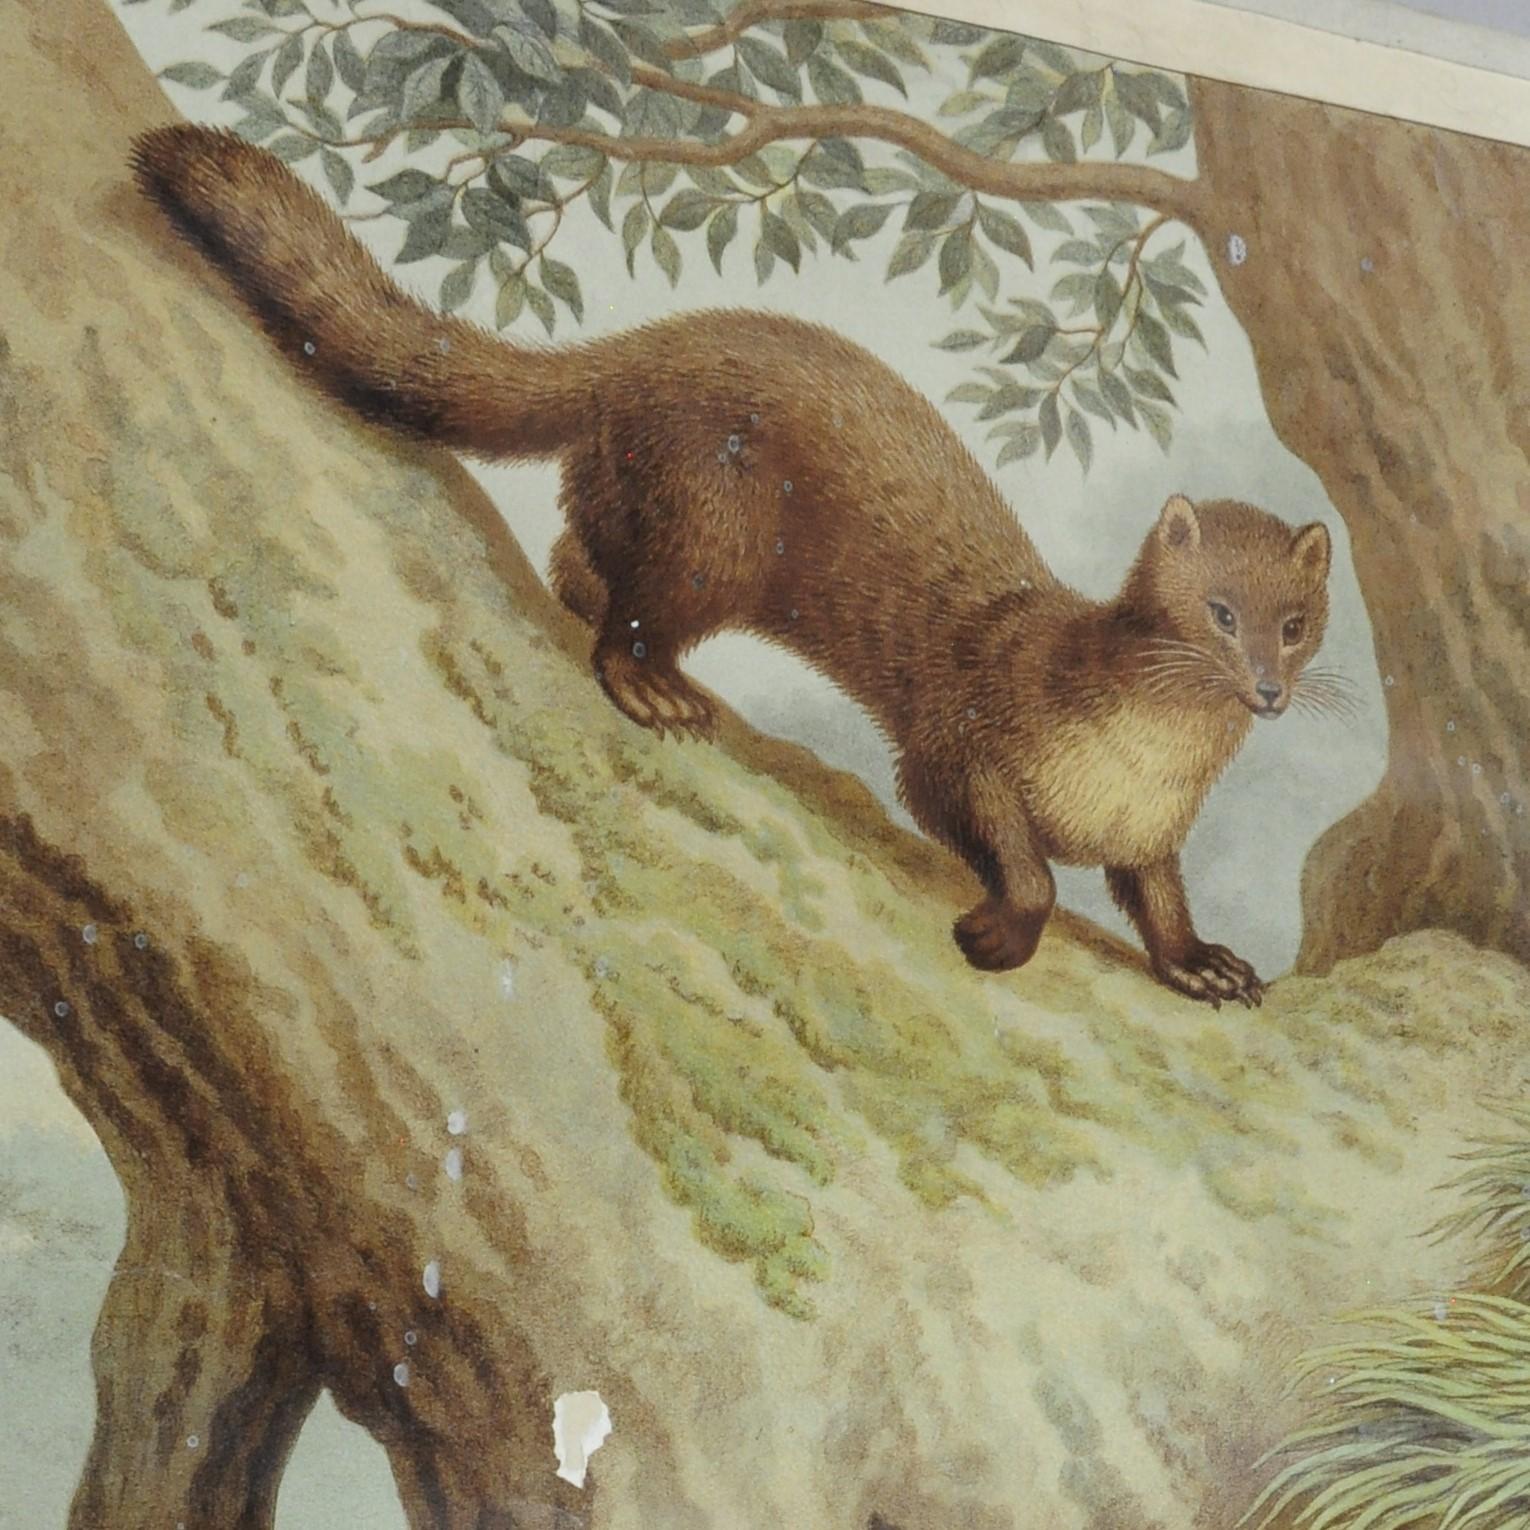 The old vintage wall chart shows a cute natural wildlife scenery of a weasel and an otter. Colorful print on thick paper nearly cardboard.
Measurements:
Width 67 cm (26.38 inch)
Height 89 cm (35.04 inch)

Background information on the history of